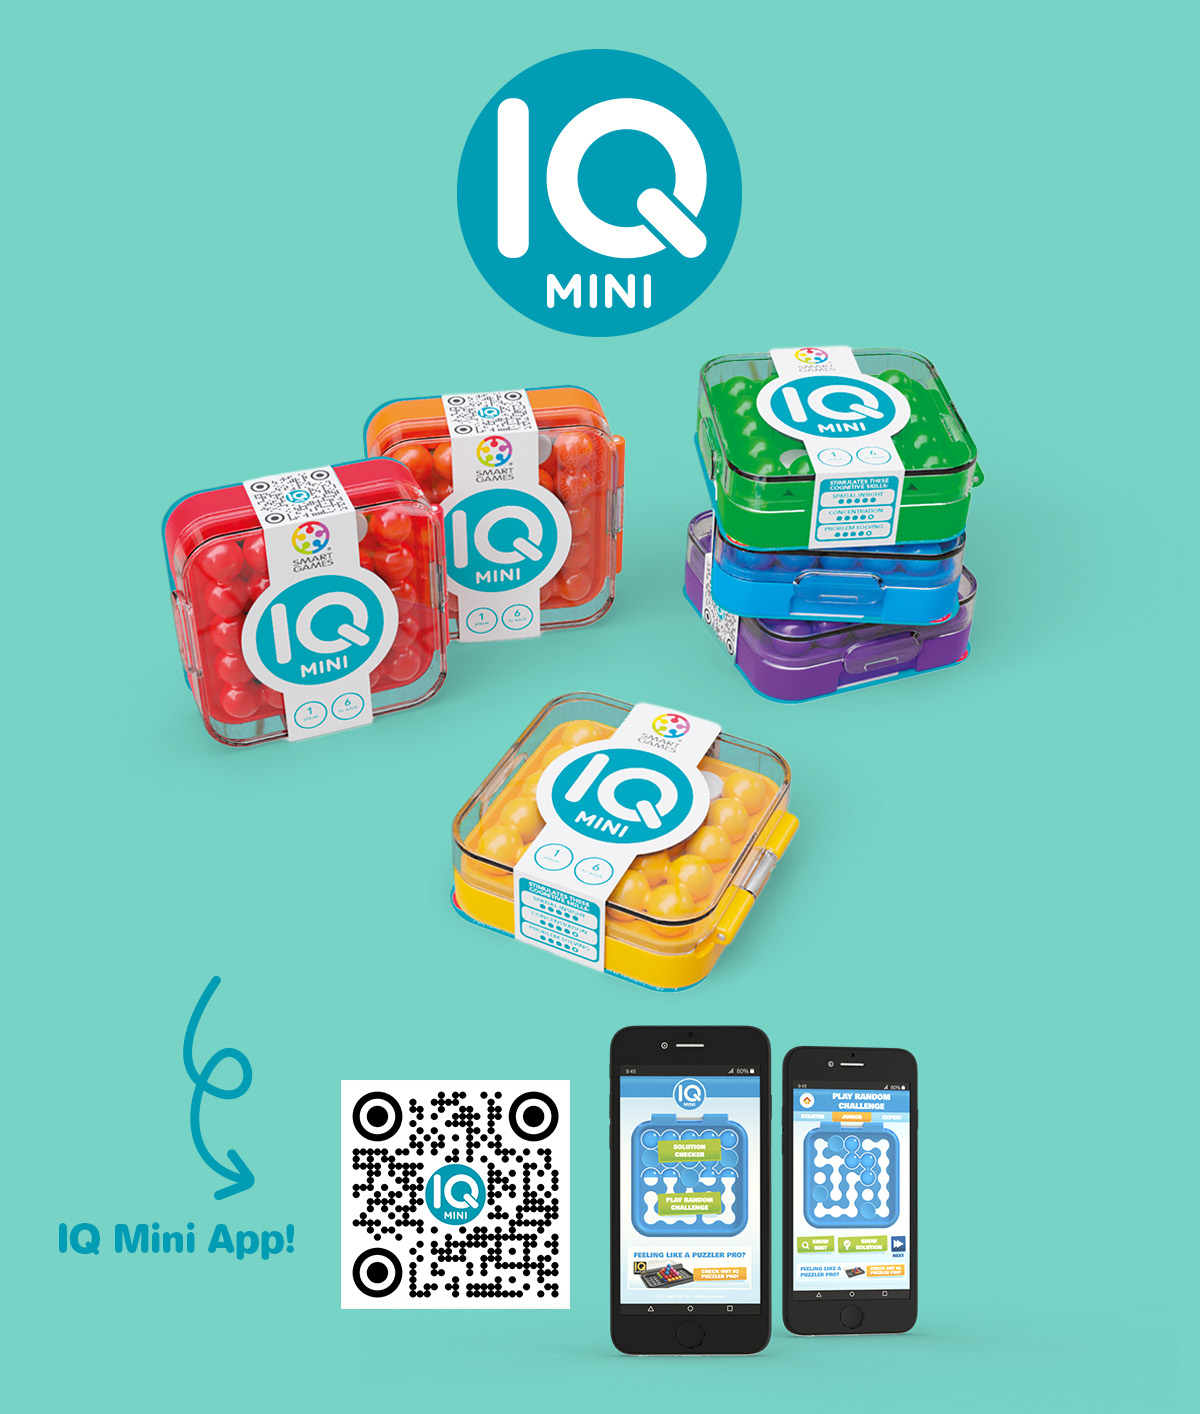 Buy Smart Games, Iq Reihe, iq fit online at a great price